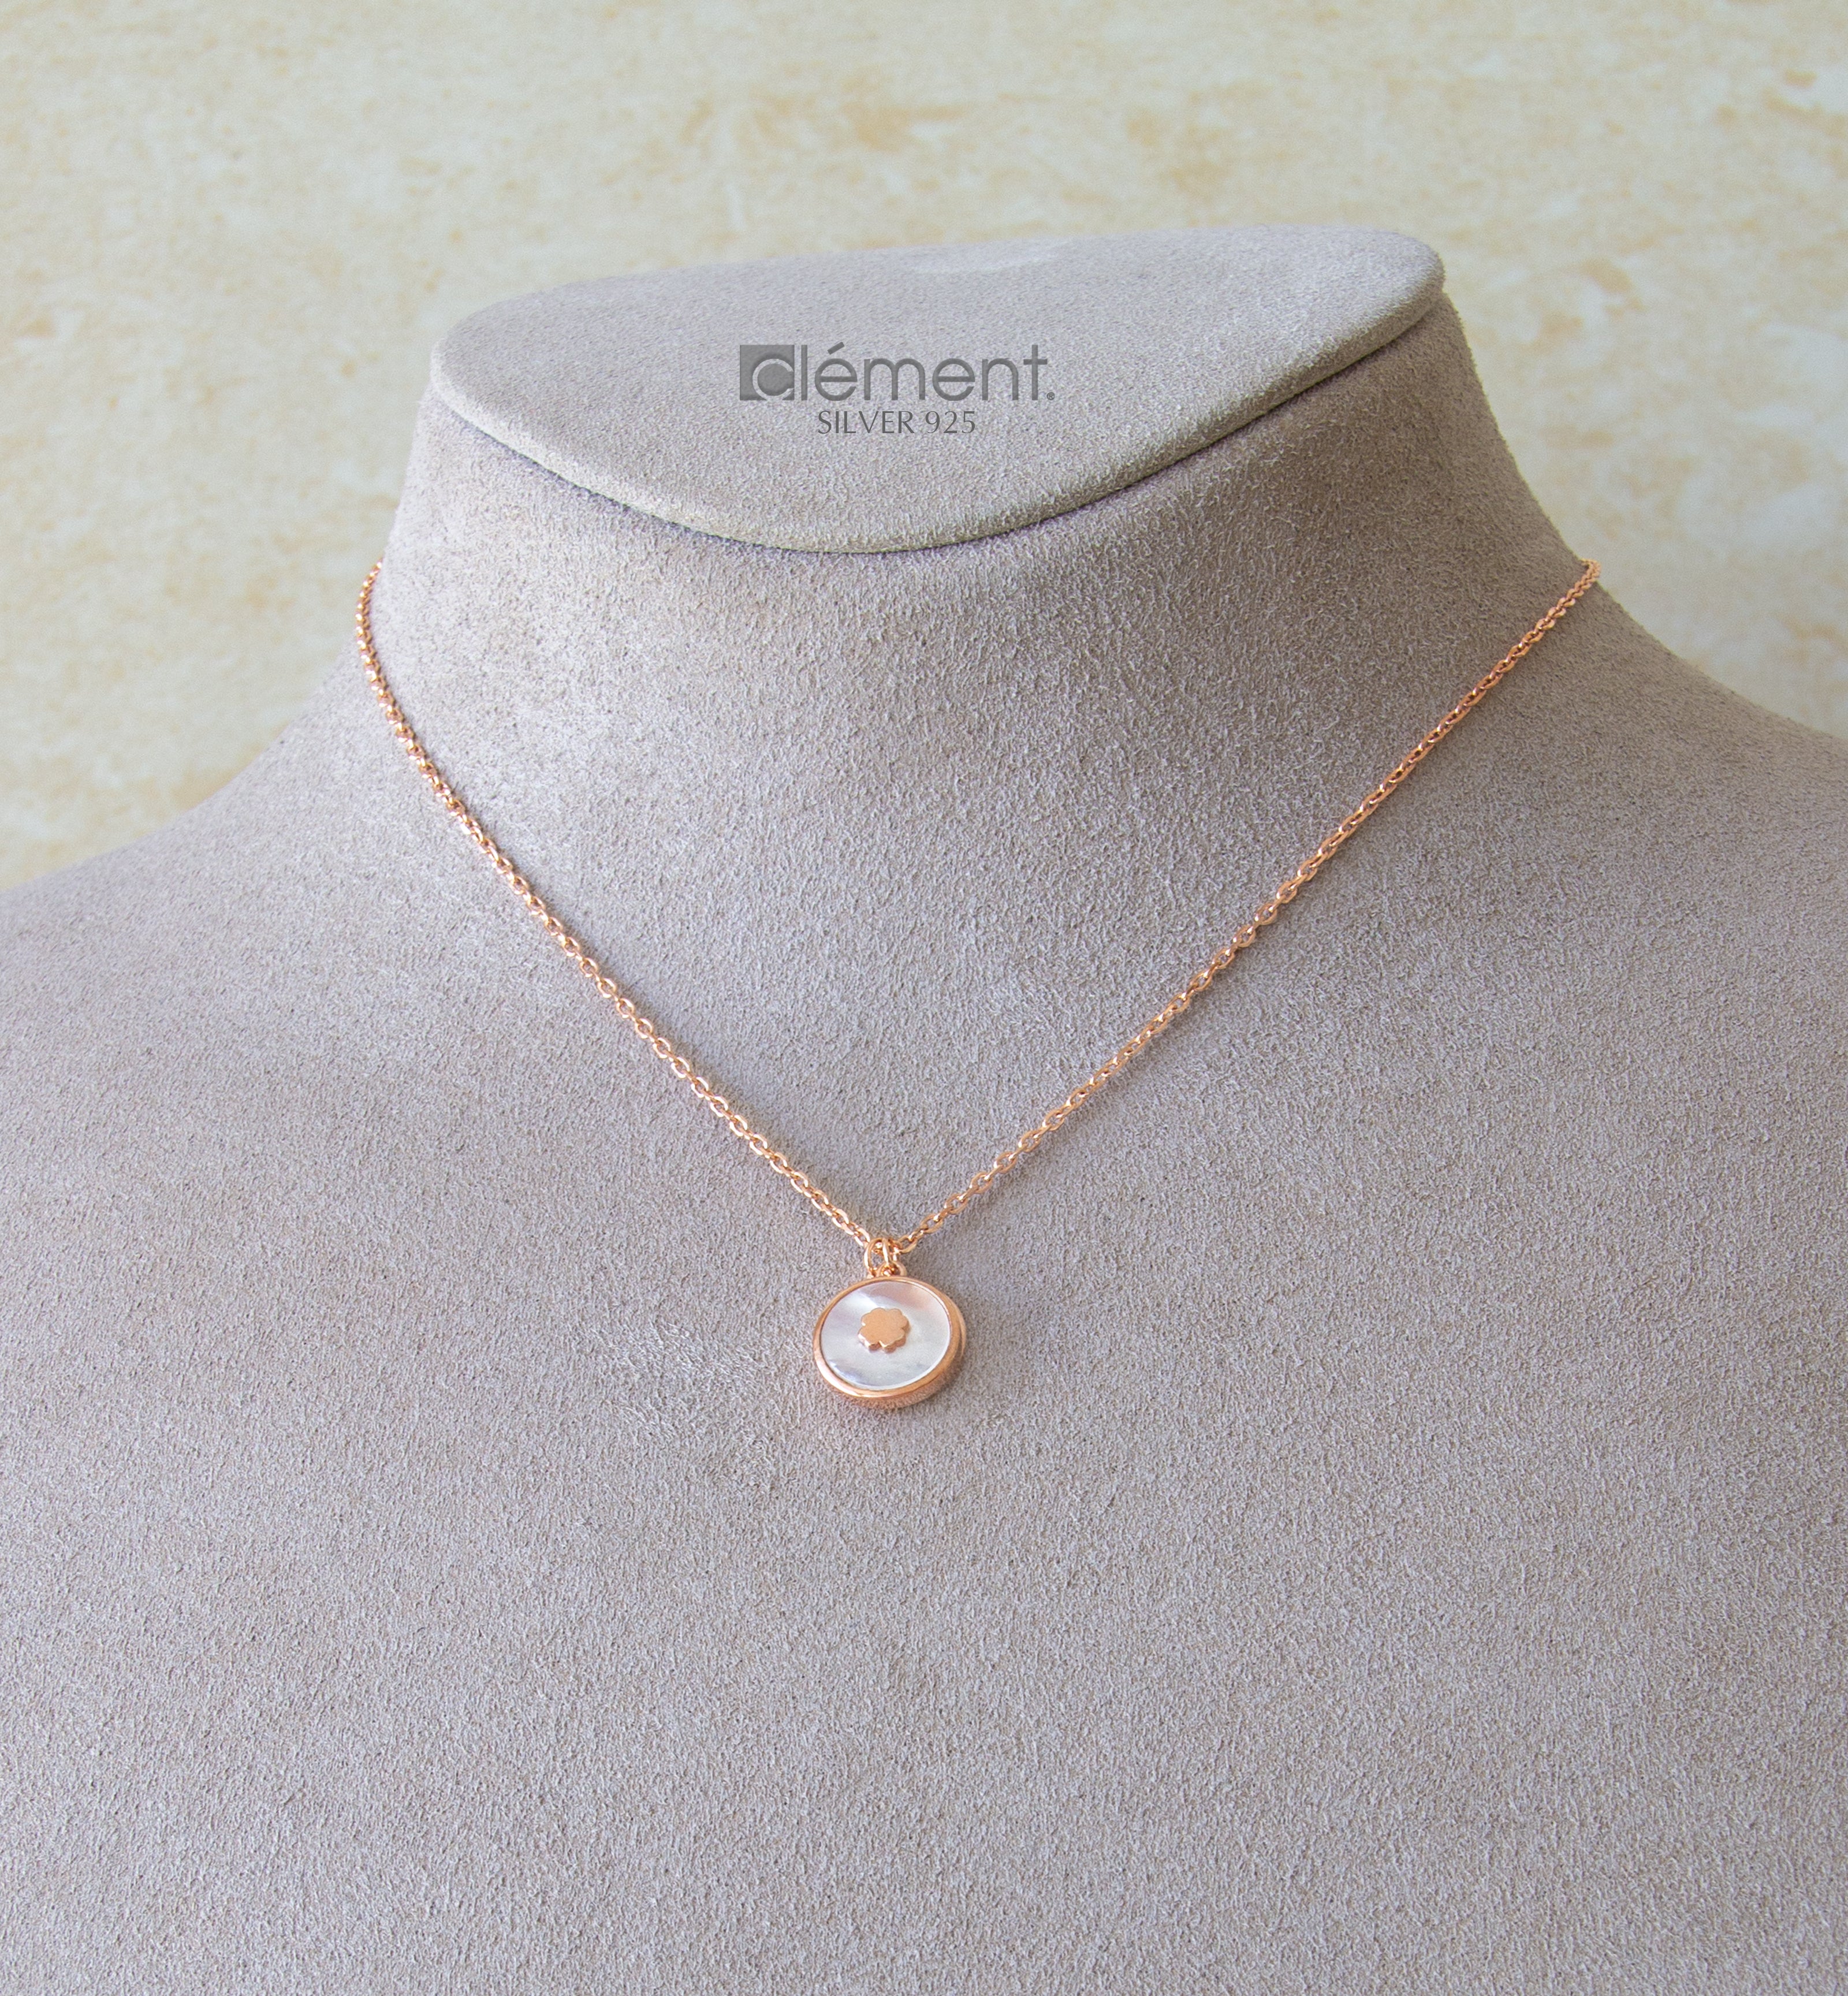 Silver 925 Rose Gold Plated Mother of Pearl and CZ Stones Necklace